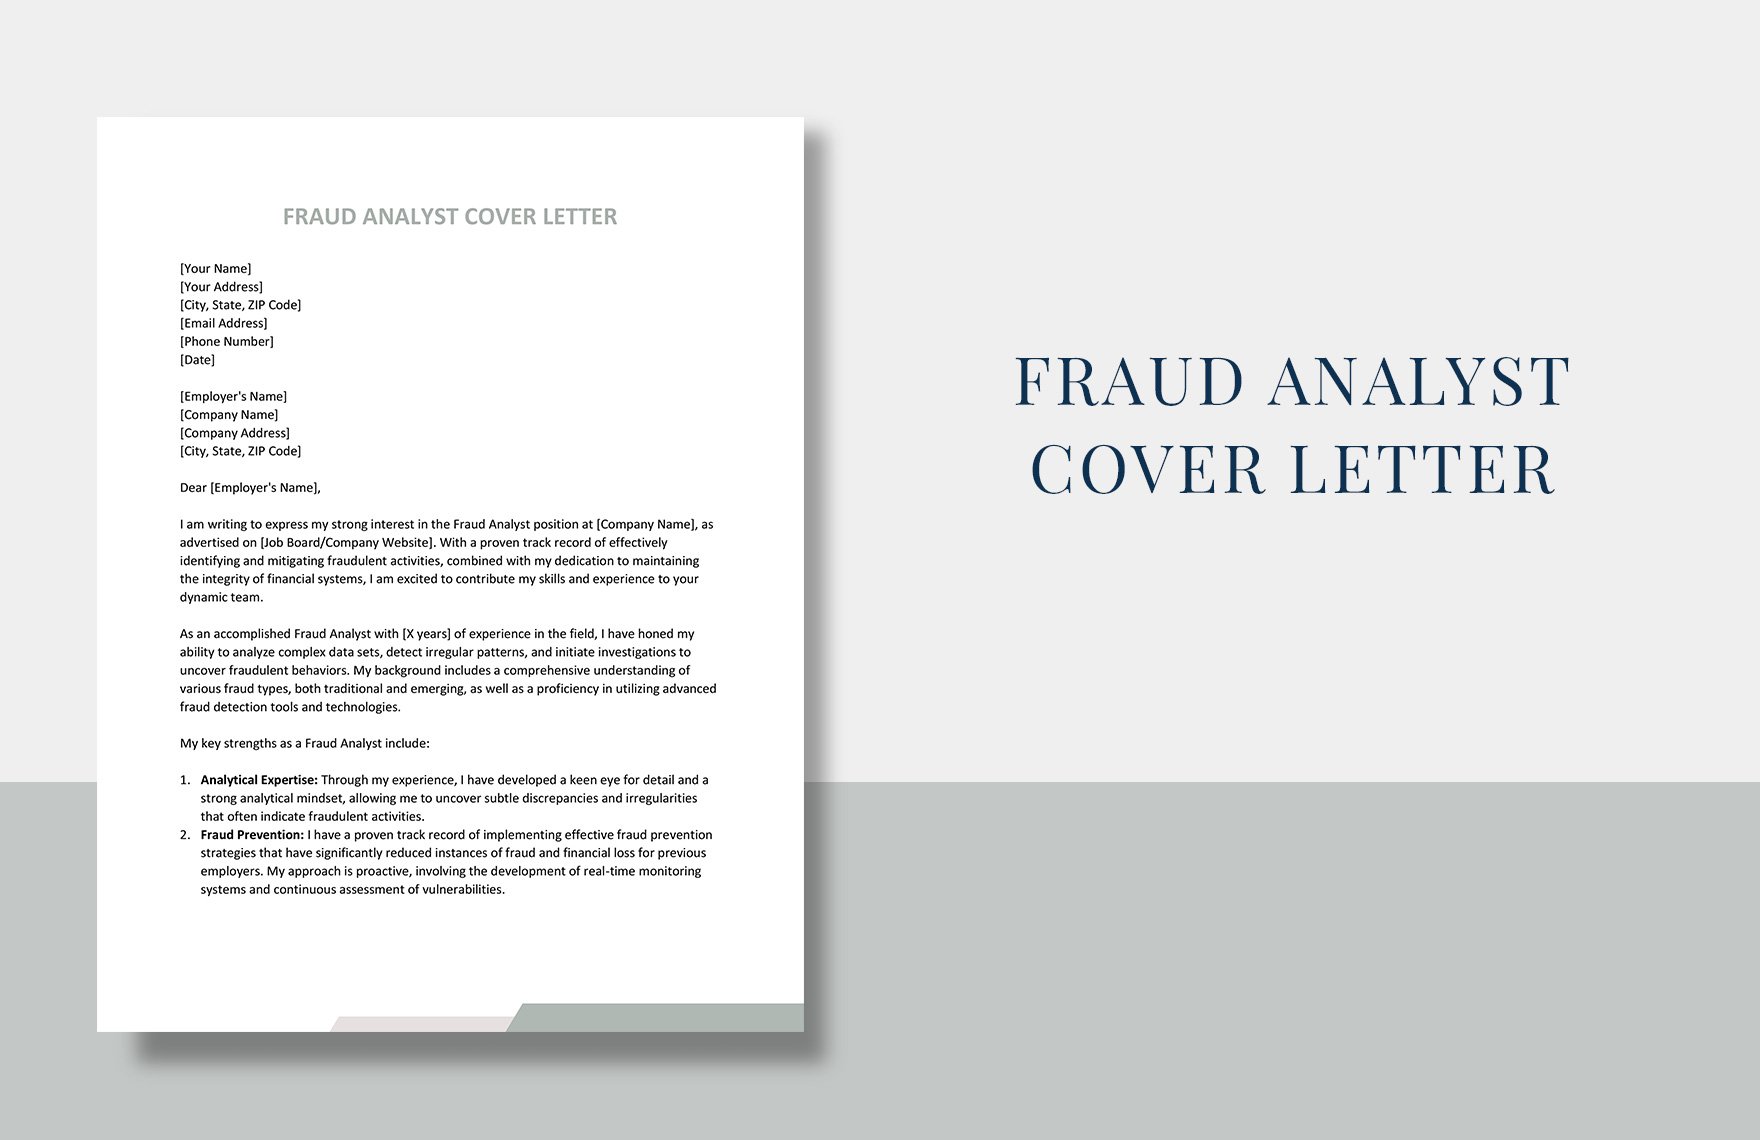 Fraud Analyst Cover Letter